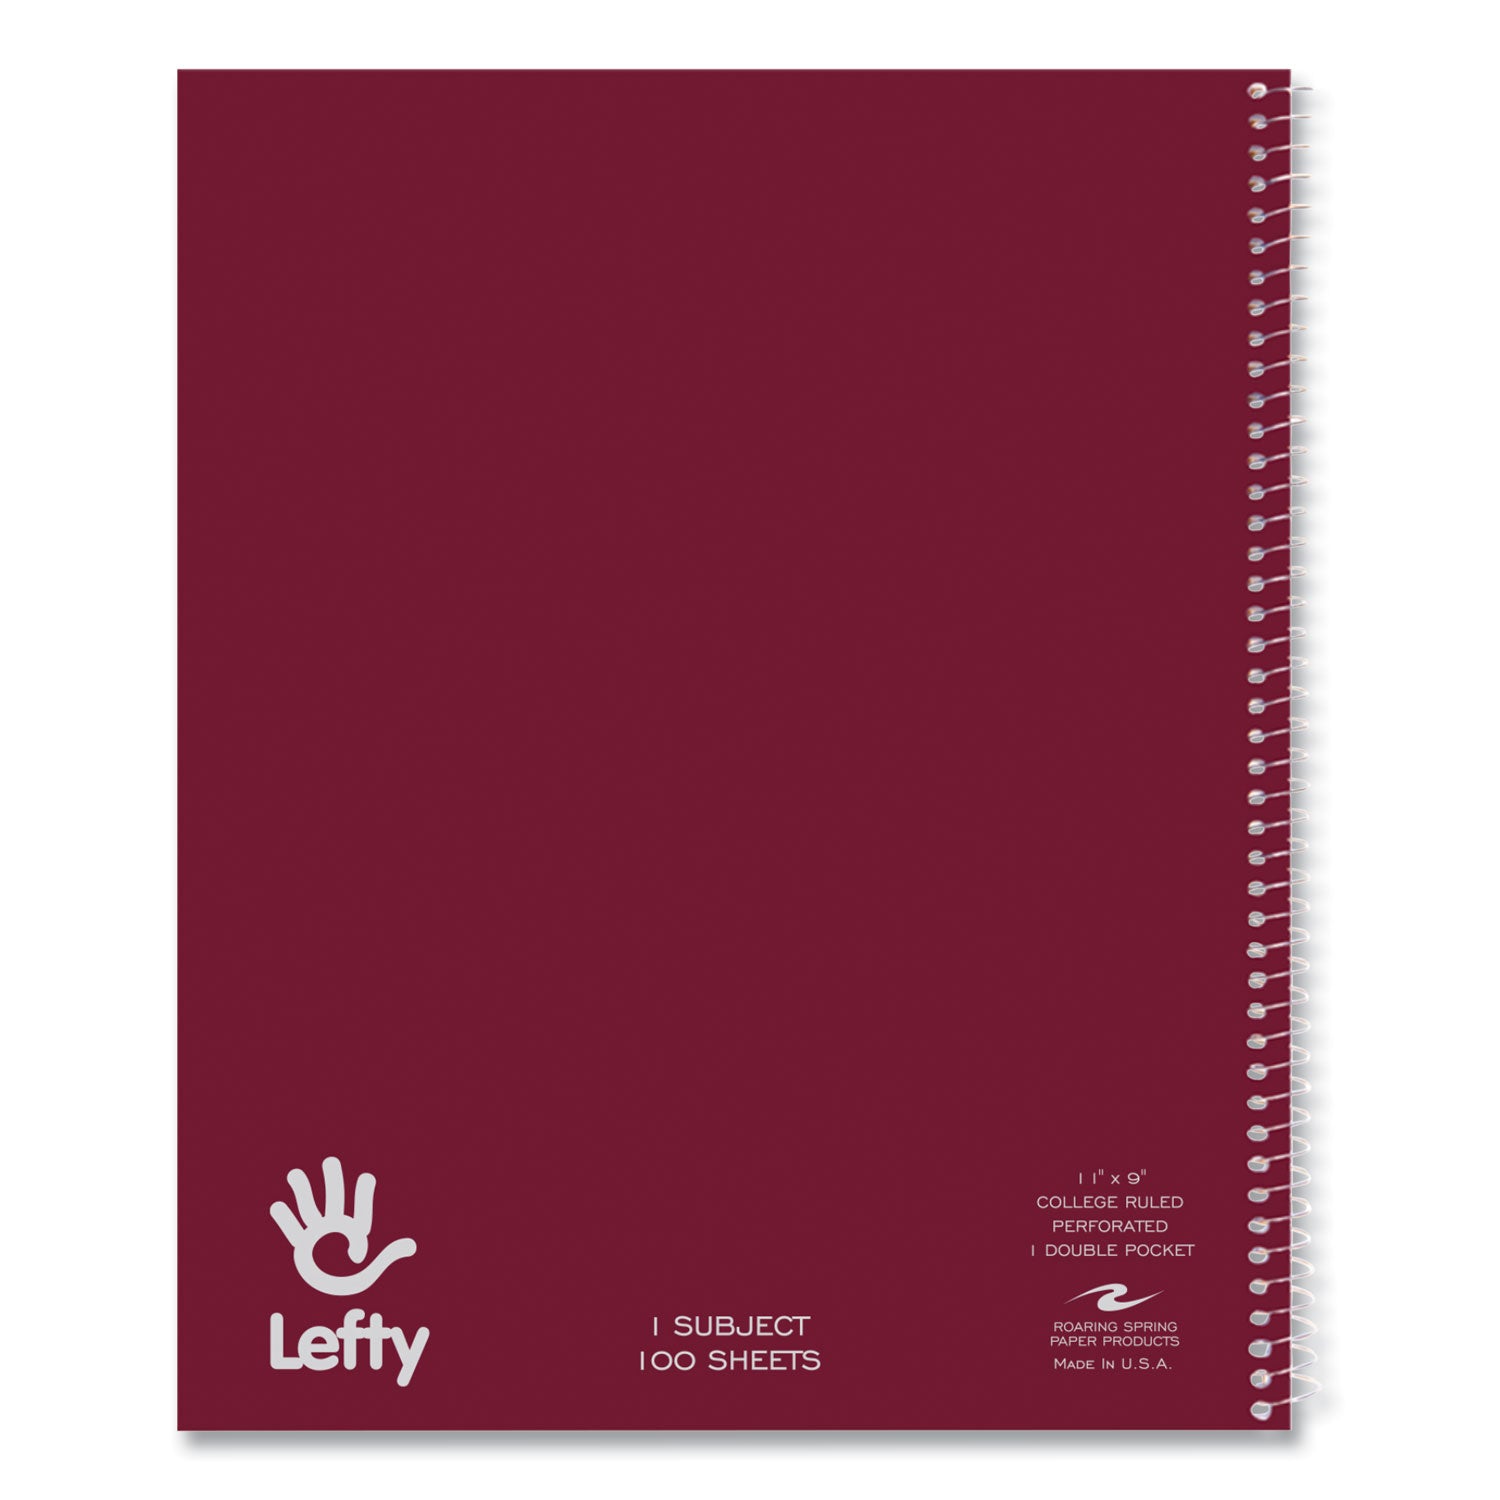 lefty-notebook-1-subject-college-rule-randomly-asst-cover-color-100-11-x-9-sheets-24-ct-ships-in-4-6-business-days_roa13503cs - 2